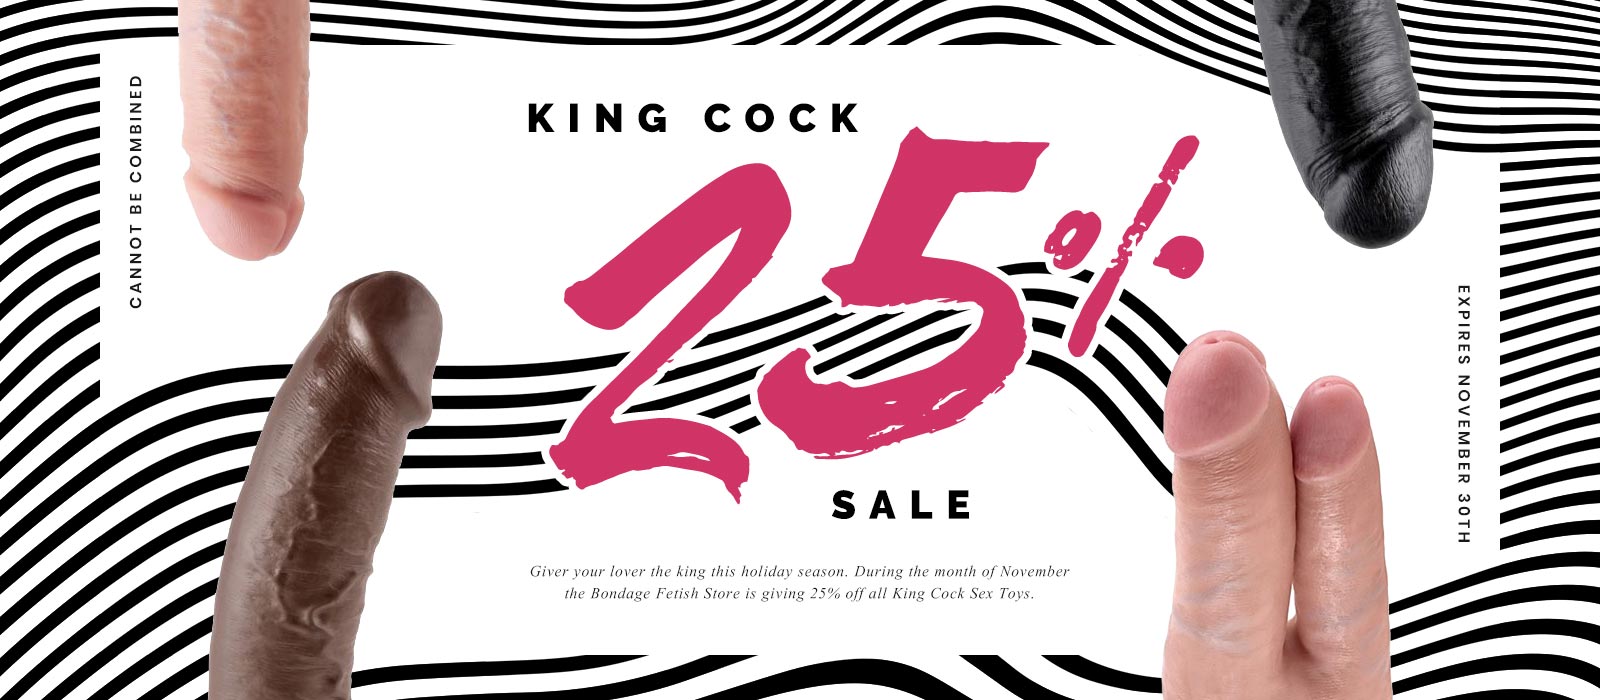 King Cock 25% off sale